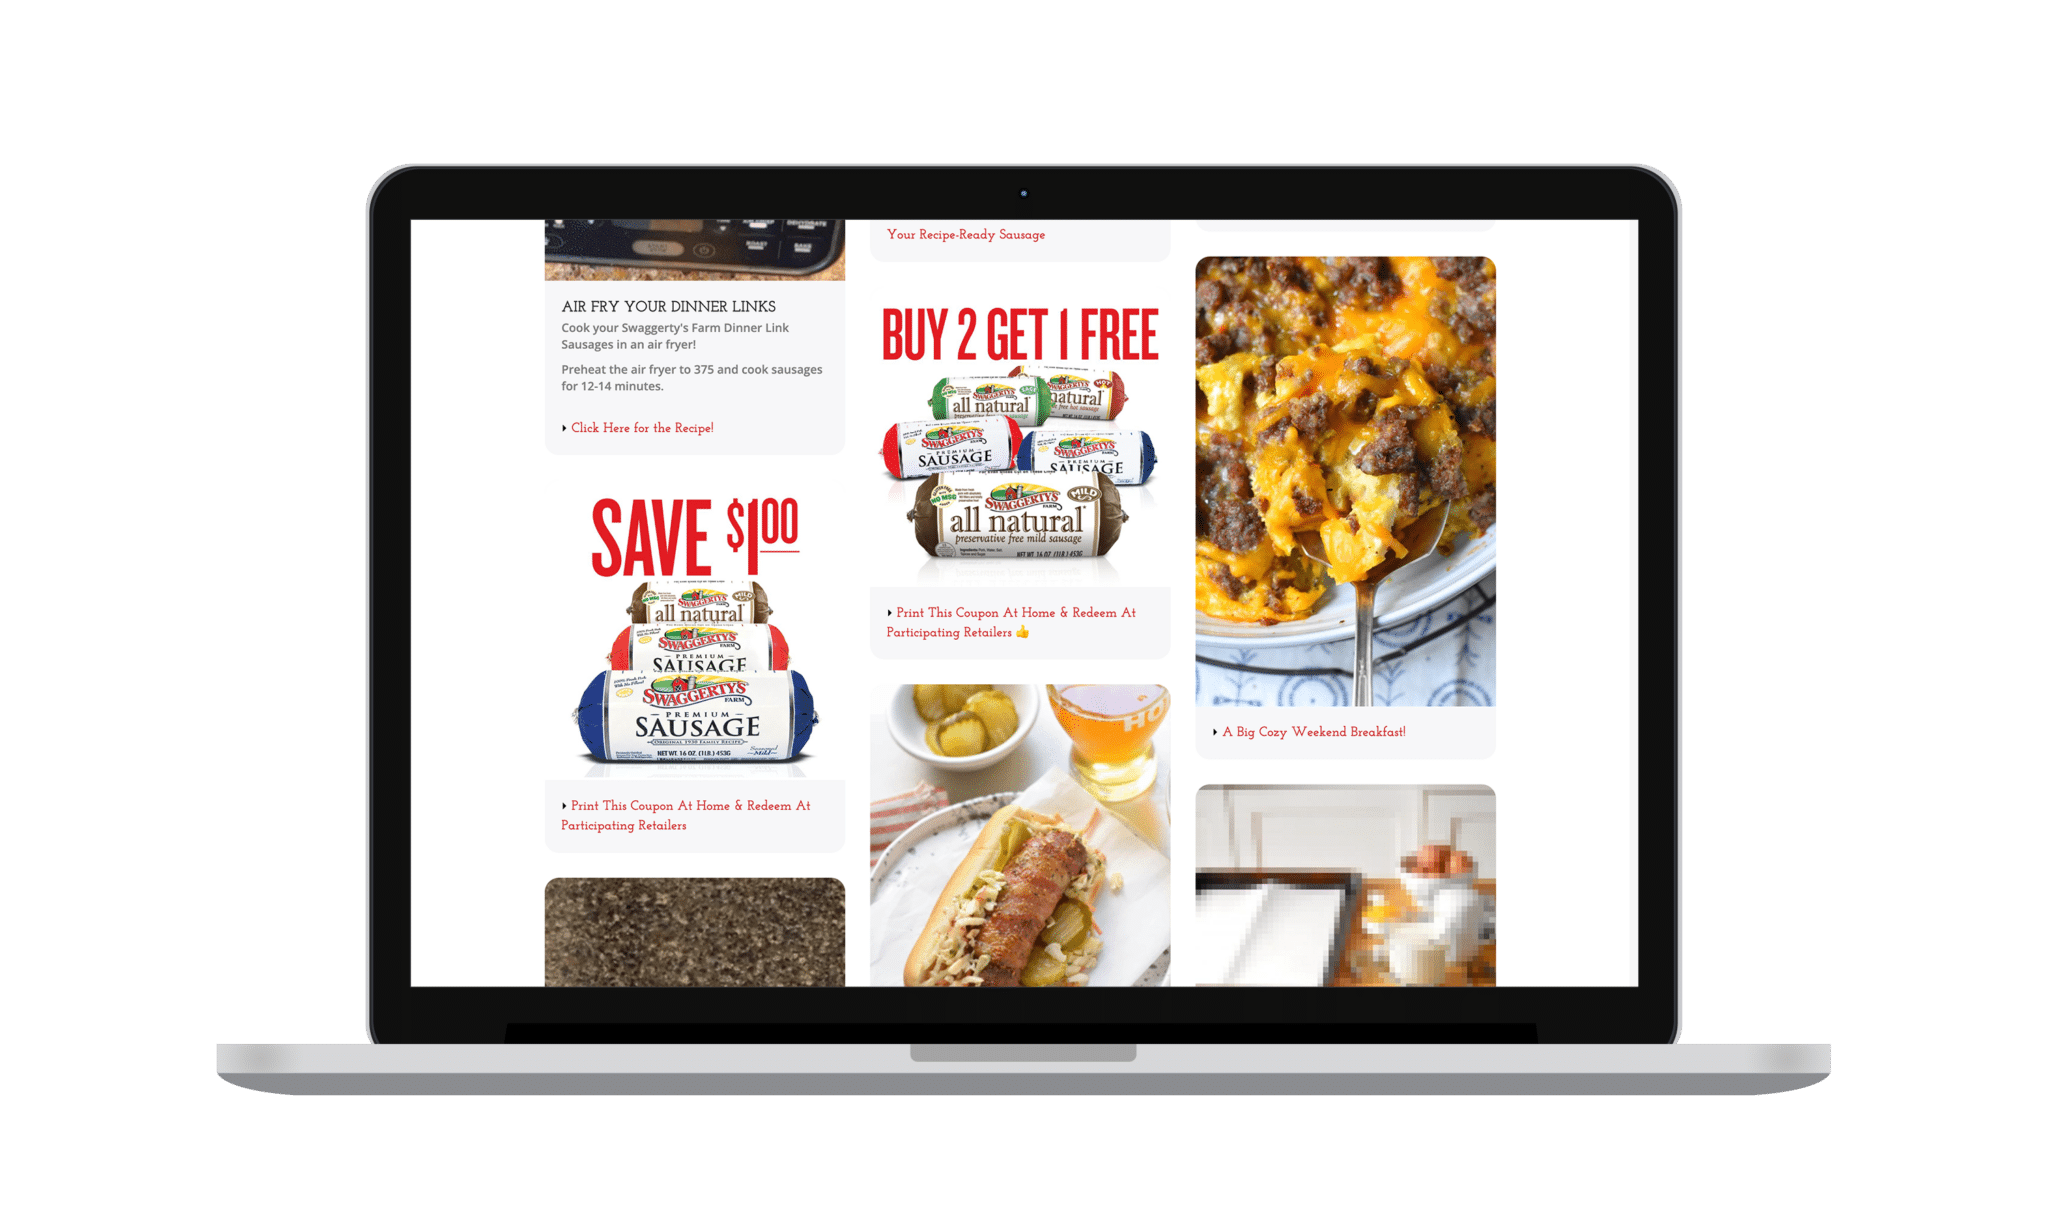 Swaggerys Sausage loyalty hub webpage with digital coupons and recipe examples.